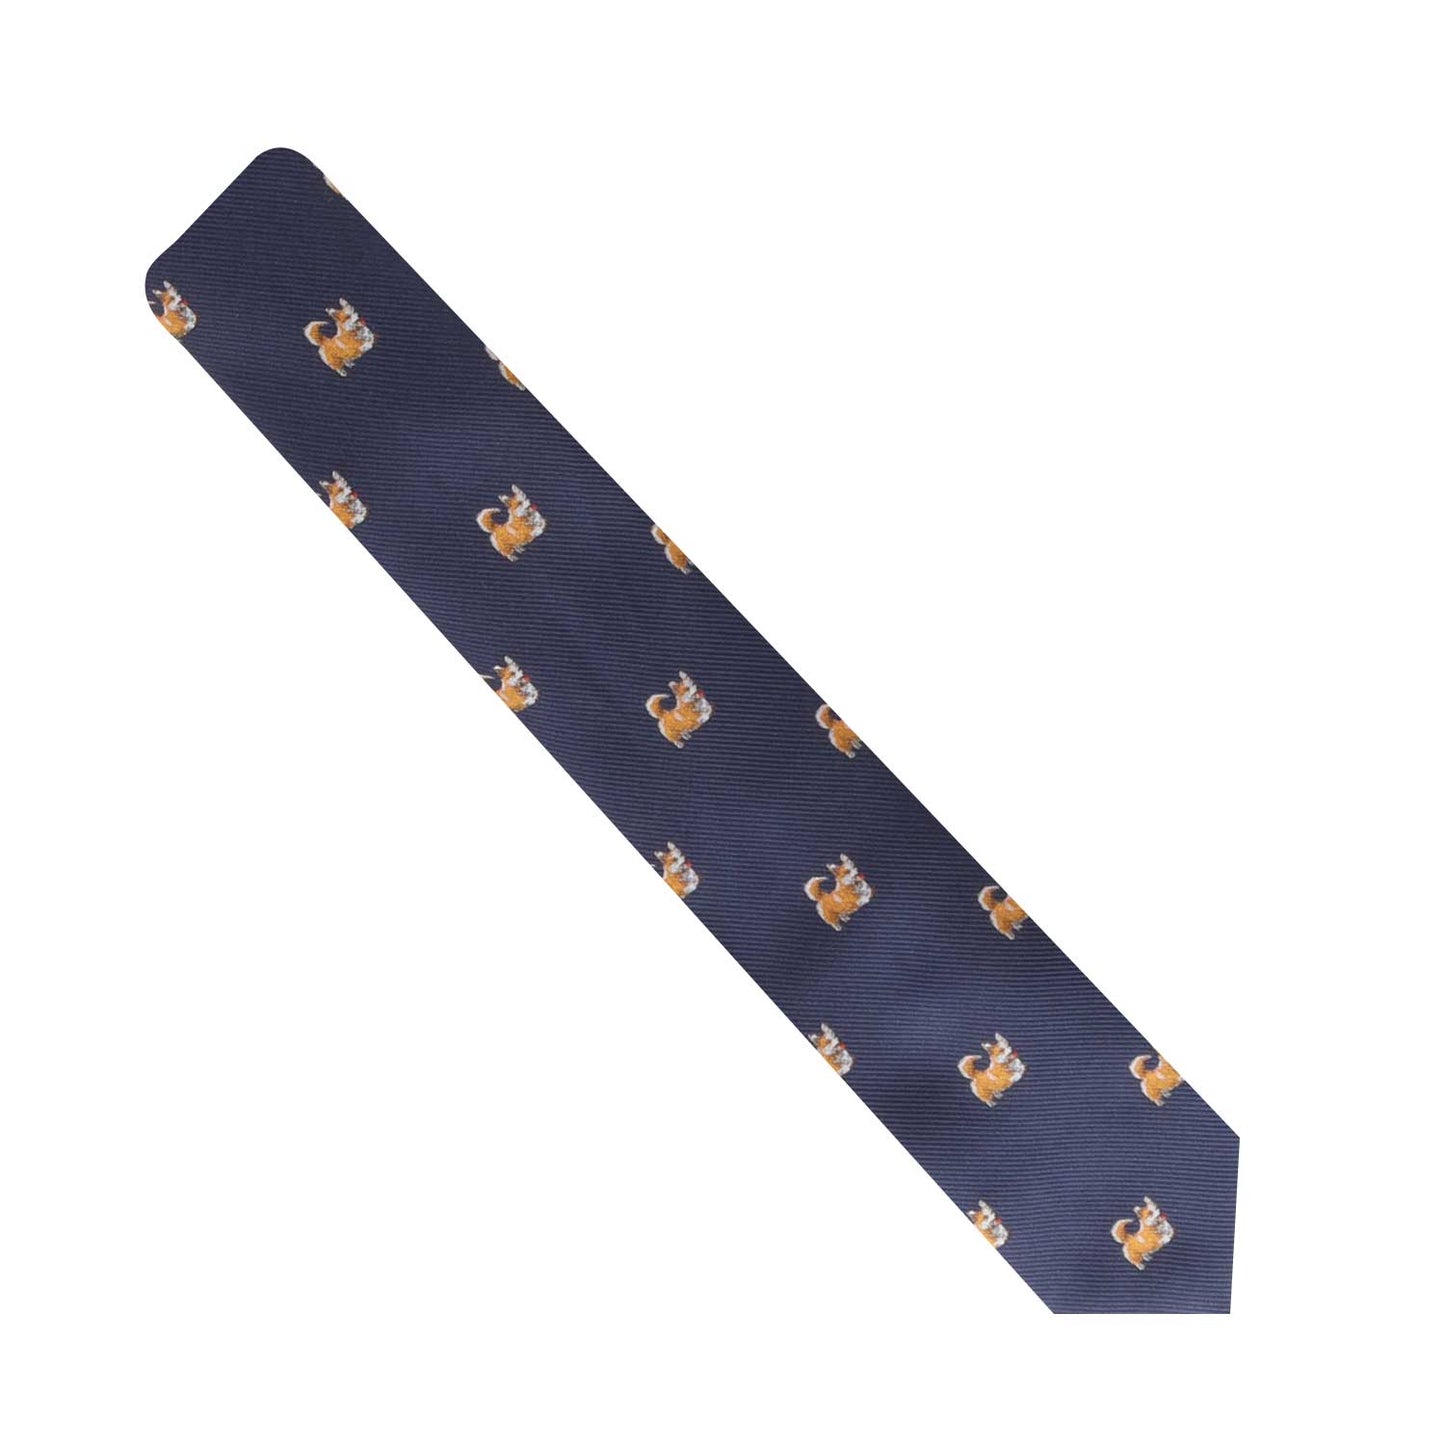 A necktie with charming Corgi dogs on it.